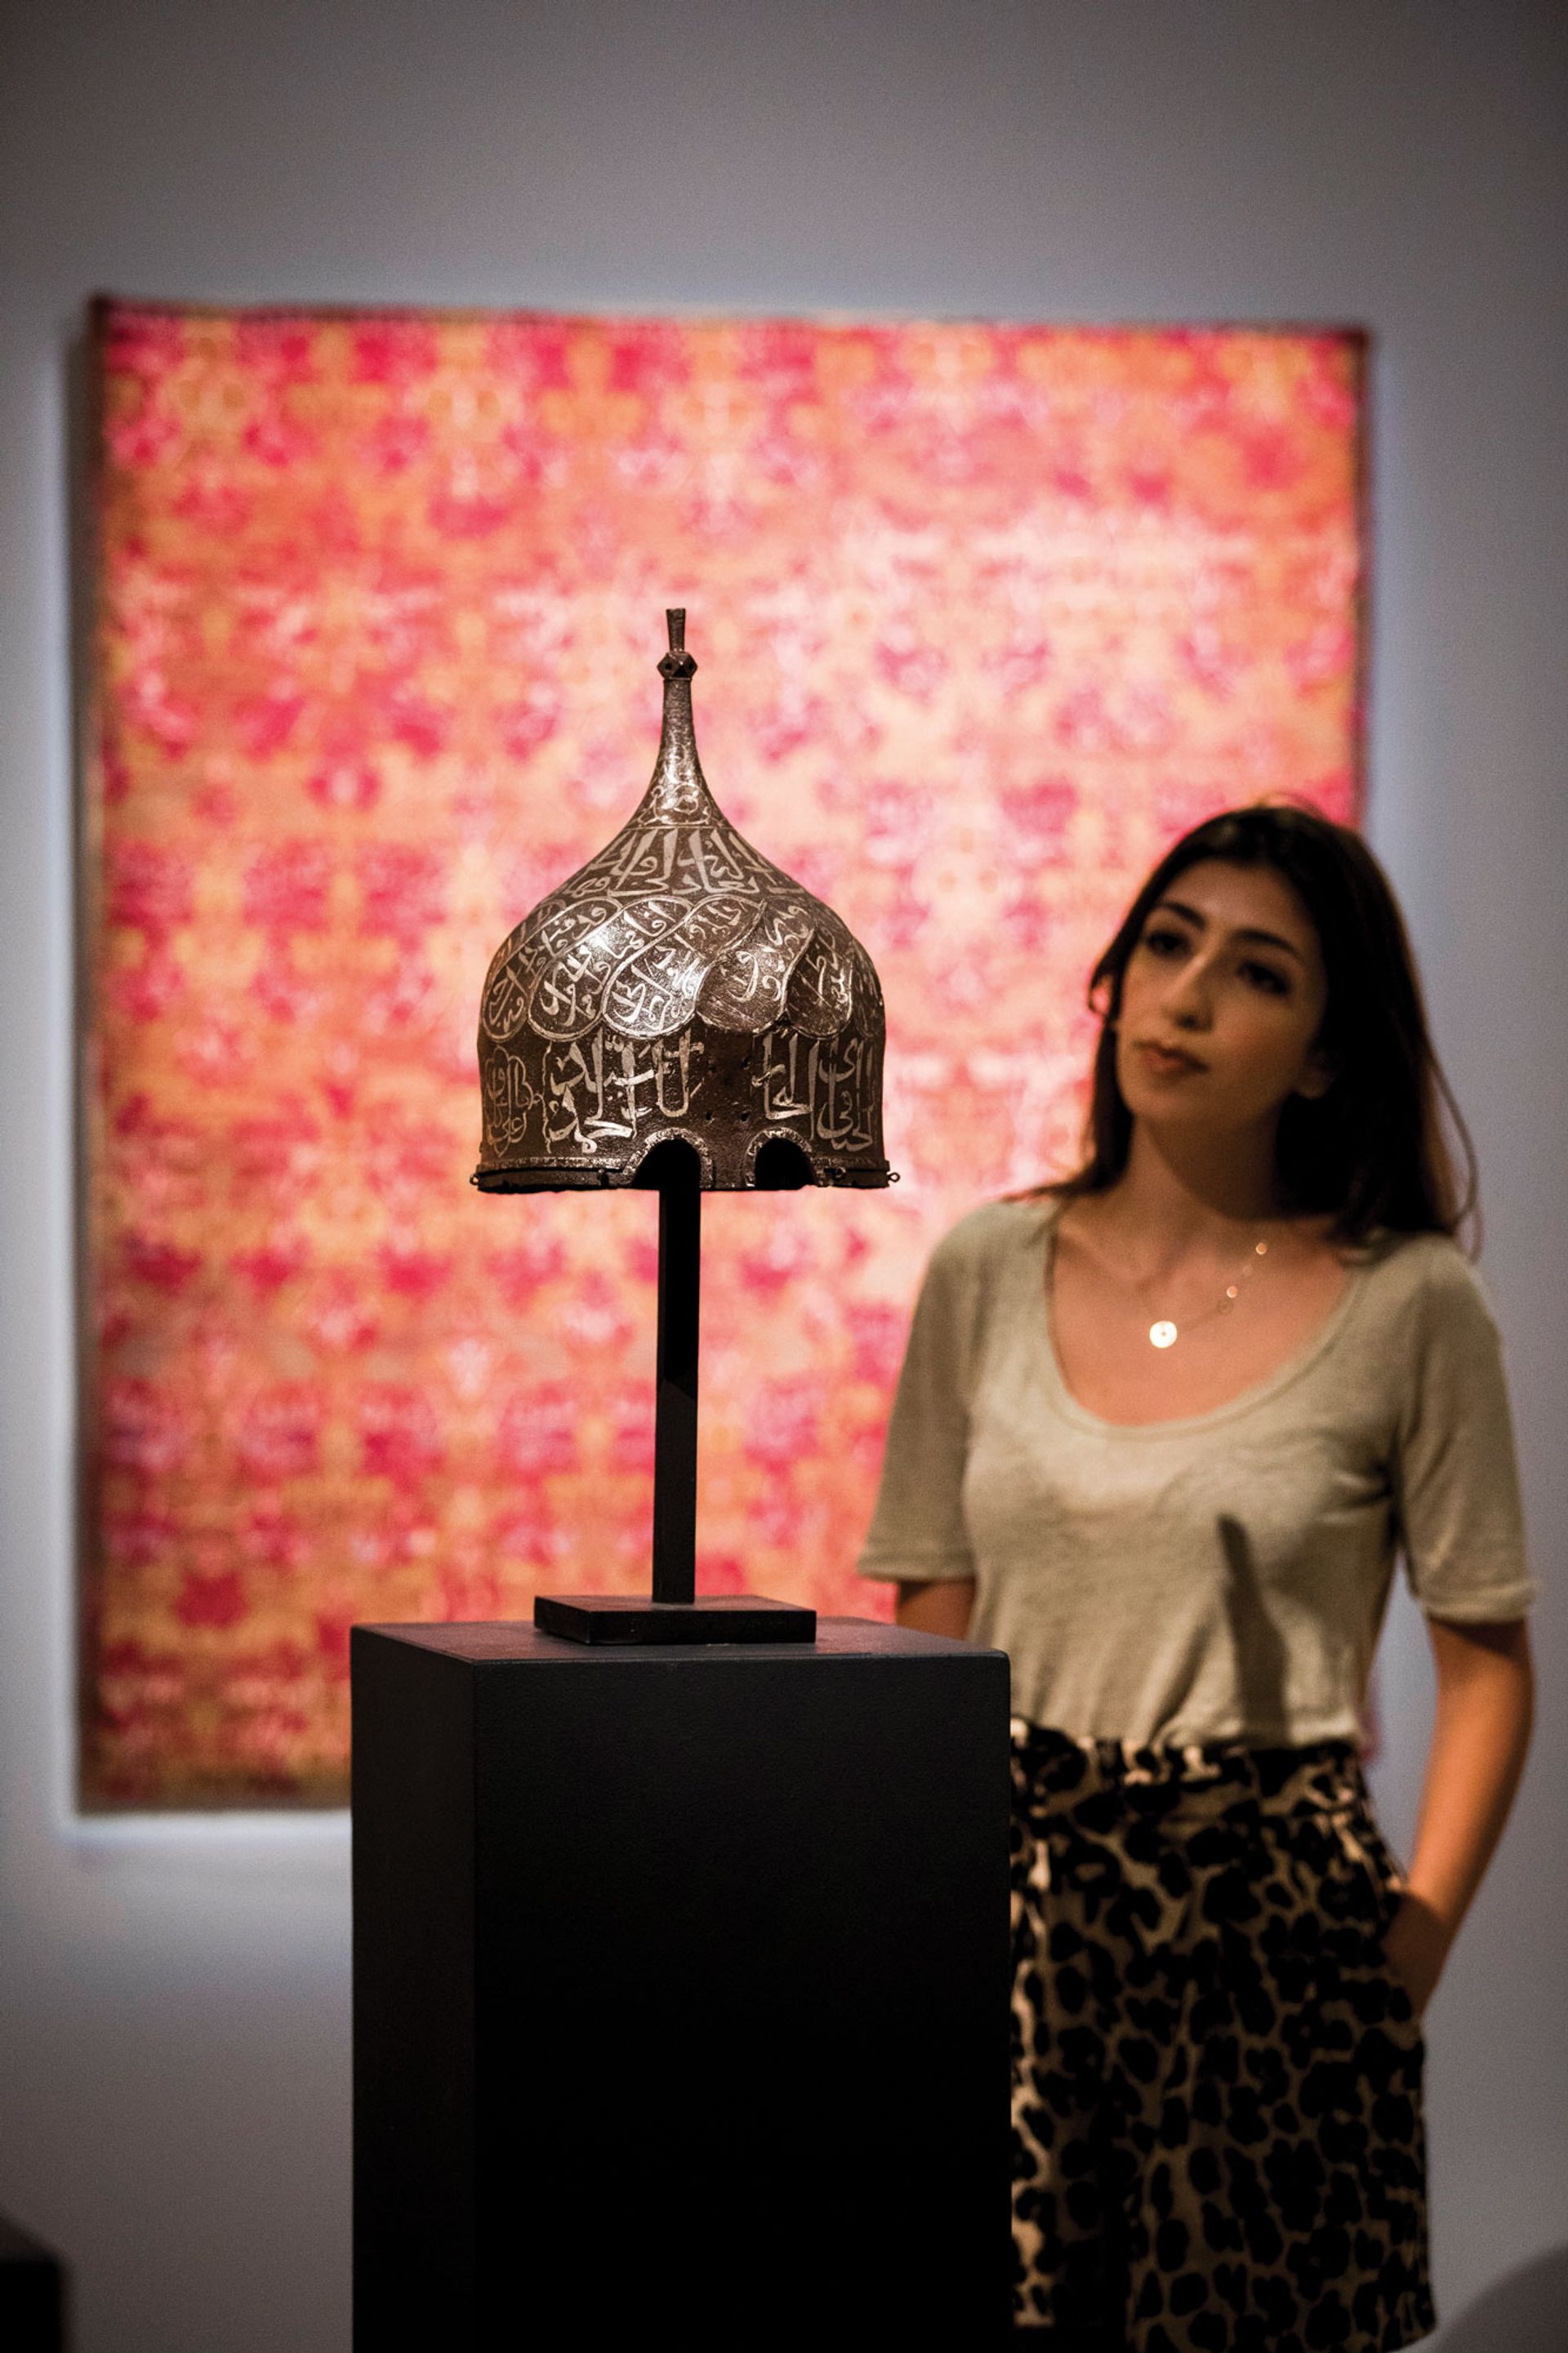 Among the Islamic museum artefacts withdrawn from sale at Sotheby's London today is this silver-inlaid Aqqoyunlu turban helmet, estimated at £400,000-£600,000 © Sotheby's